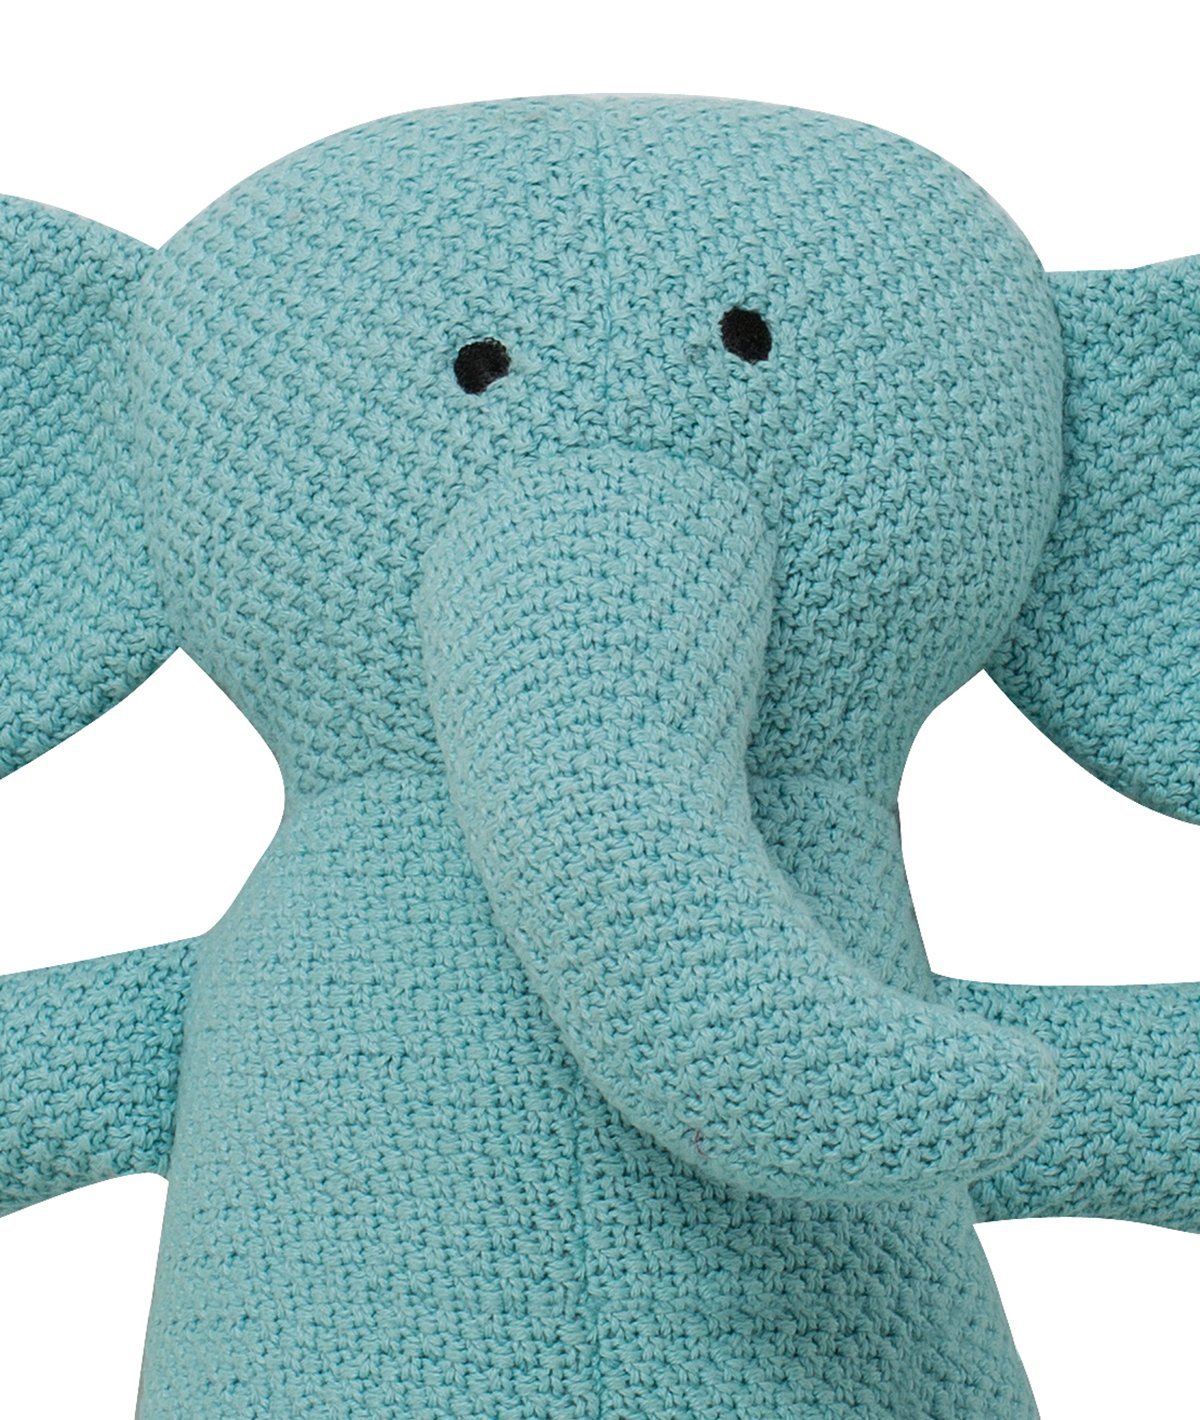 Little Ganesha - Pearl Aqua 100% Cotton Knitted Stuffed Soft Toy for Babies / Kids